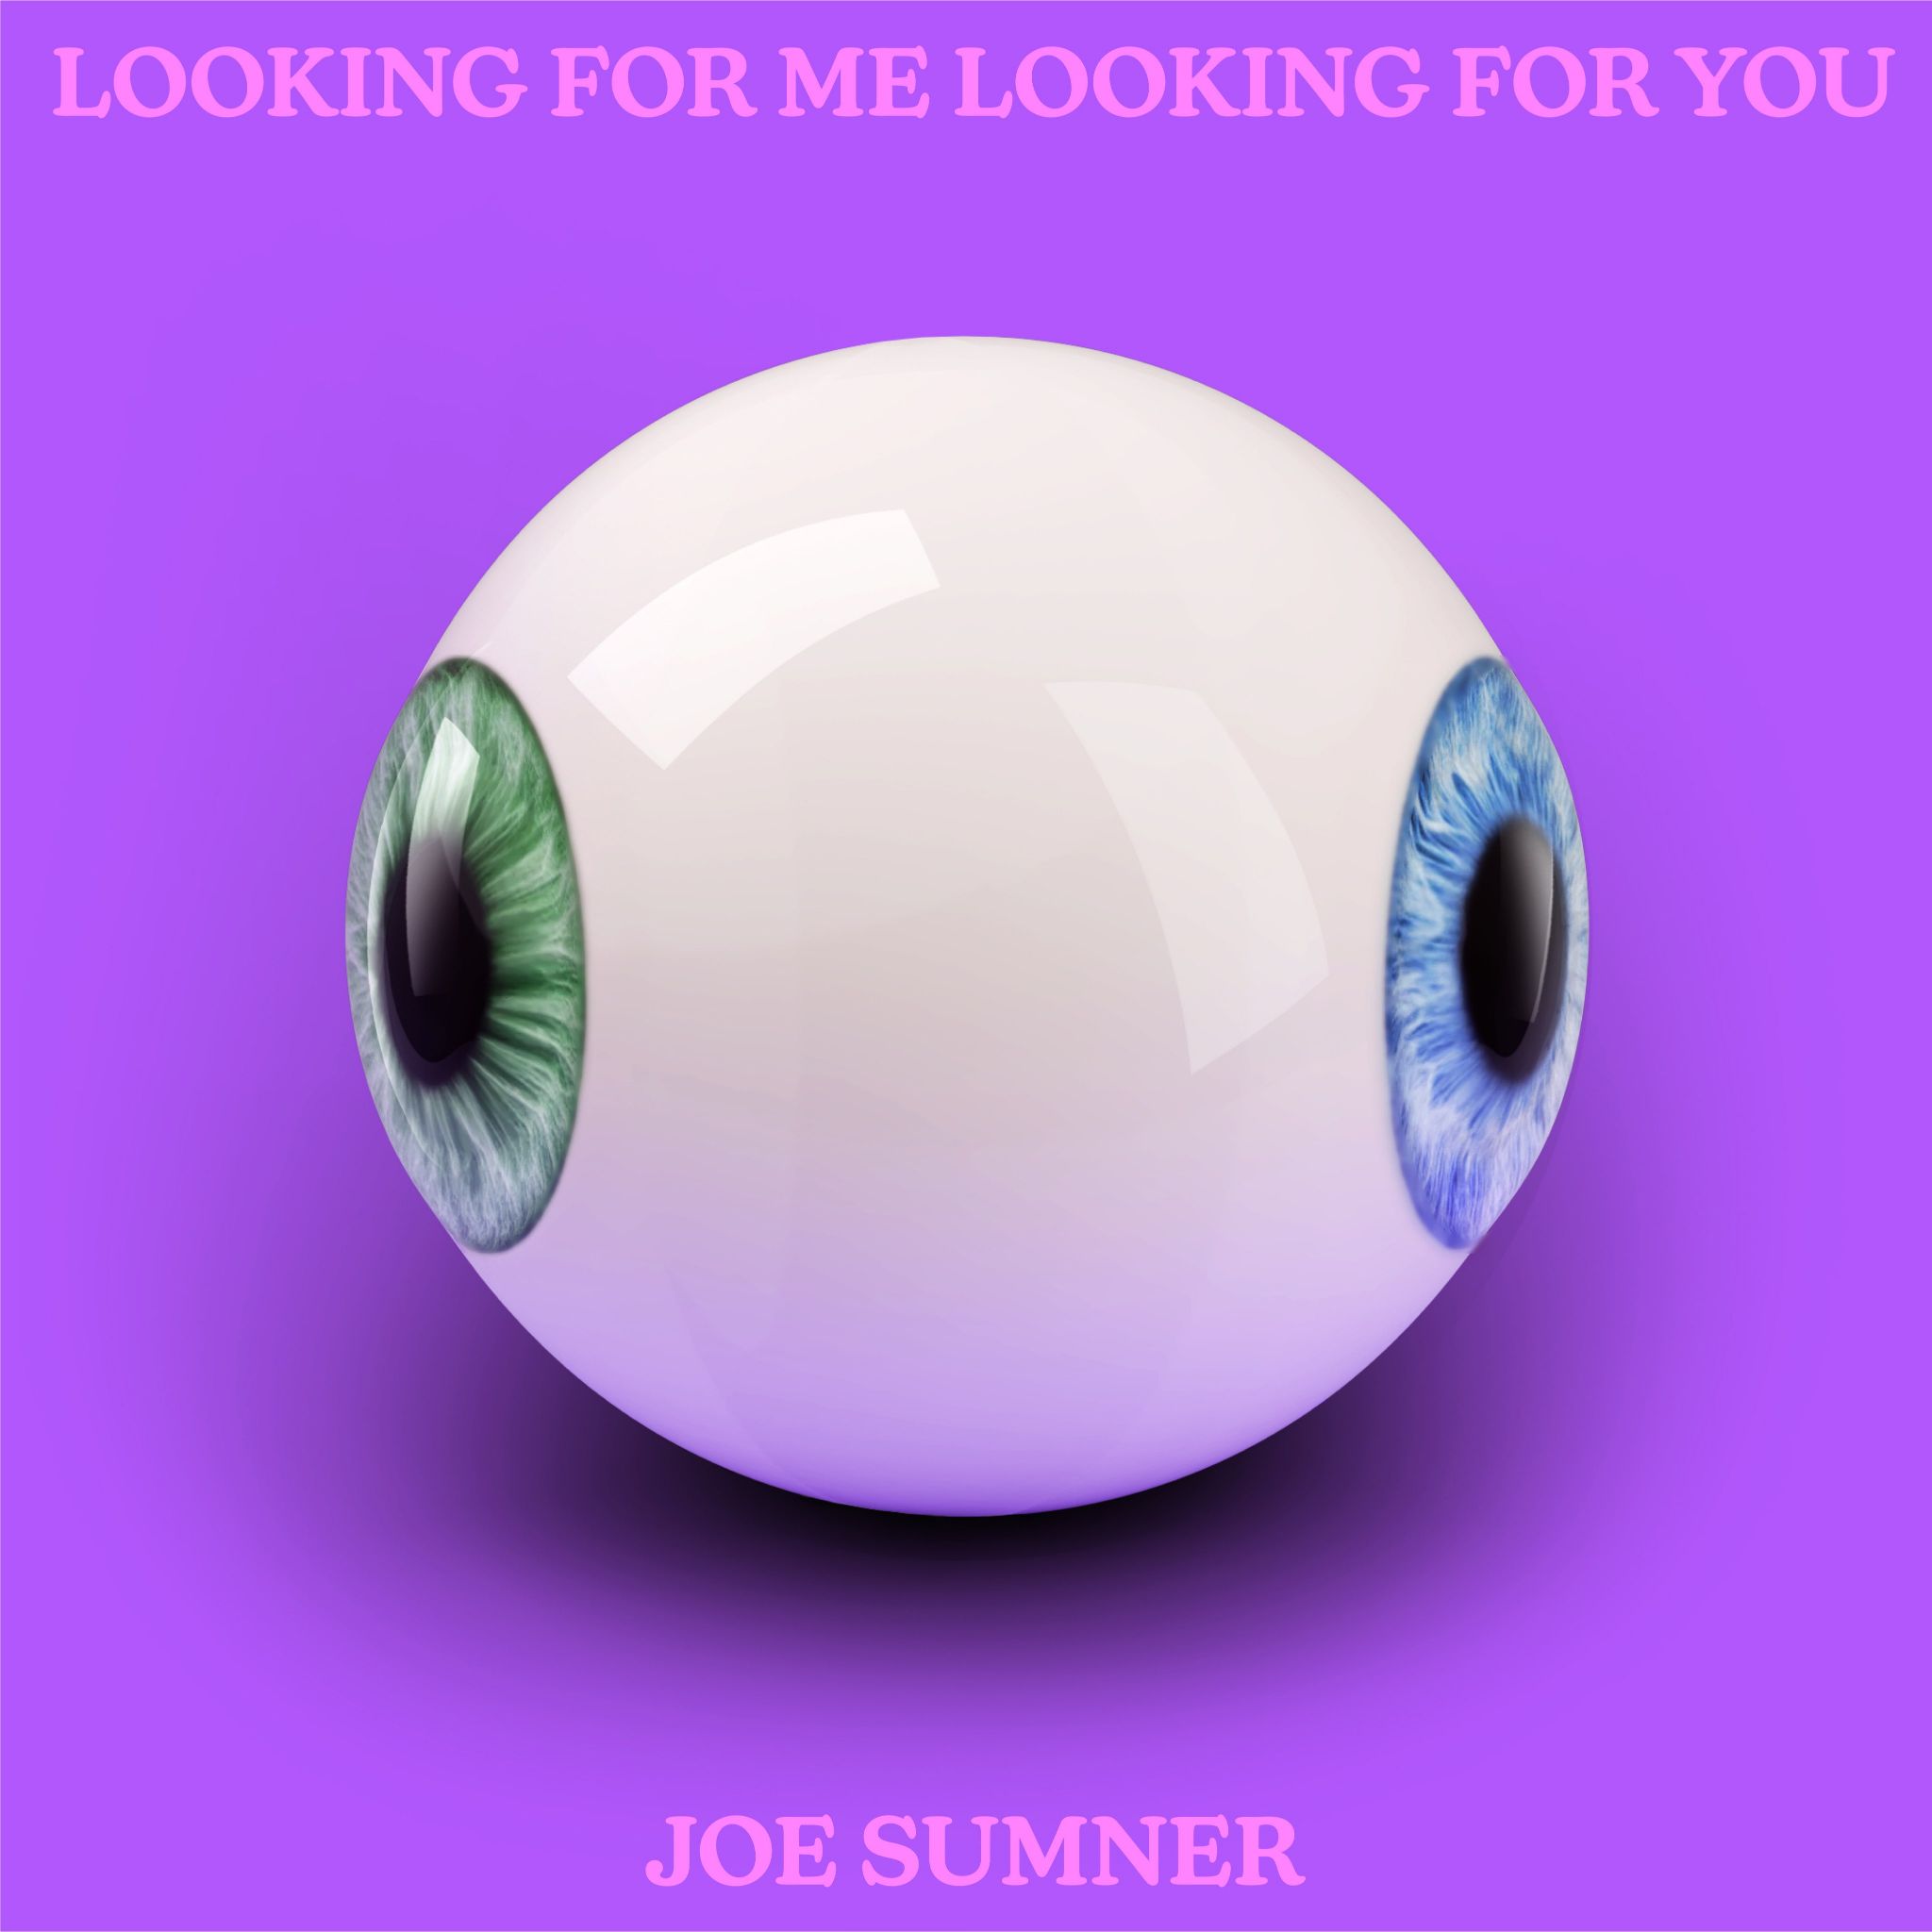 Joe Sumner Releases New Single, "Looking For Me, Looking For You"